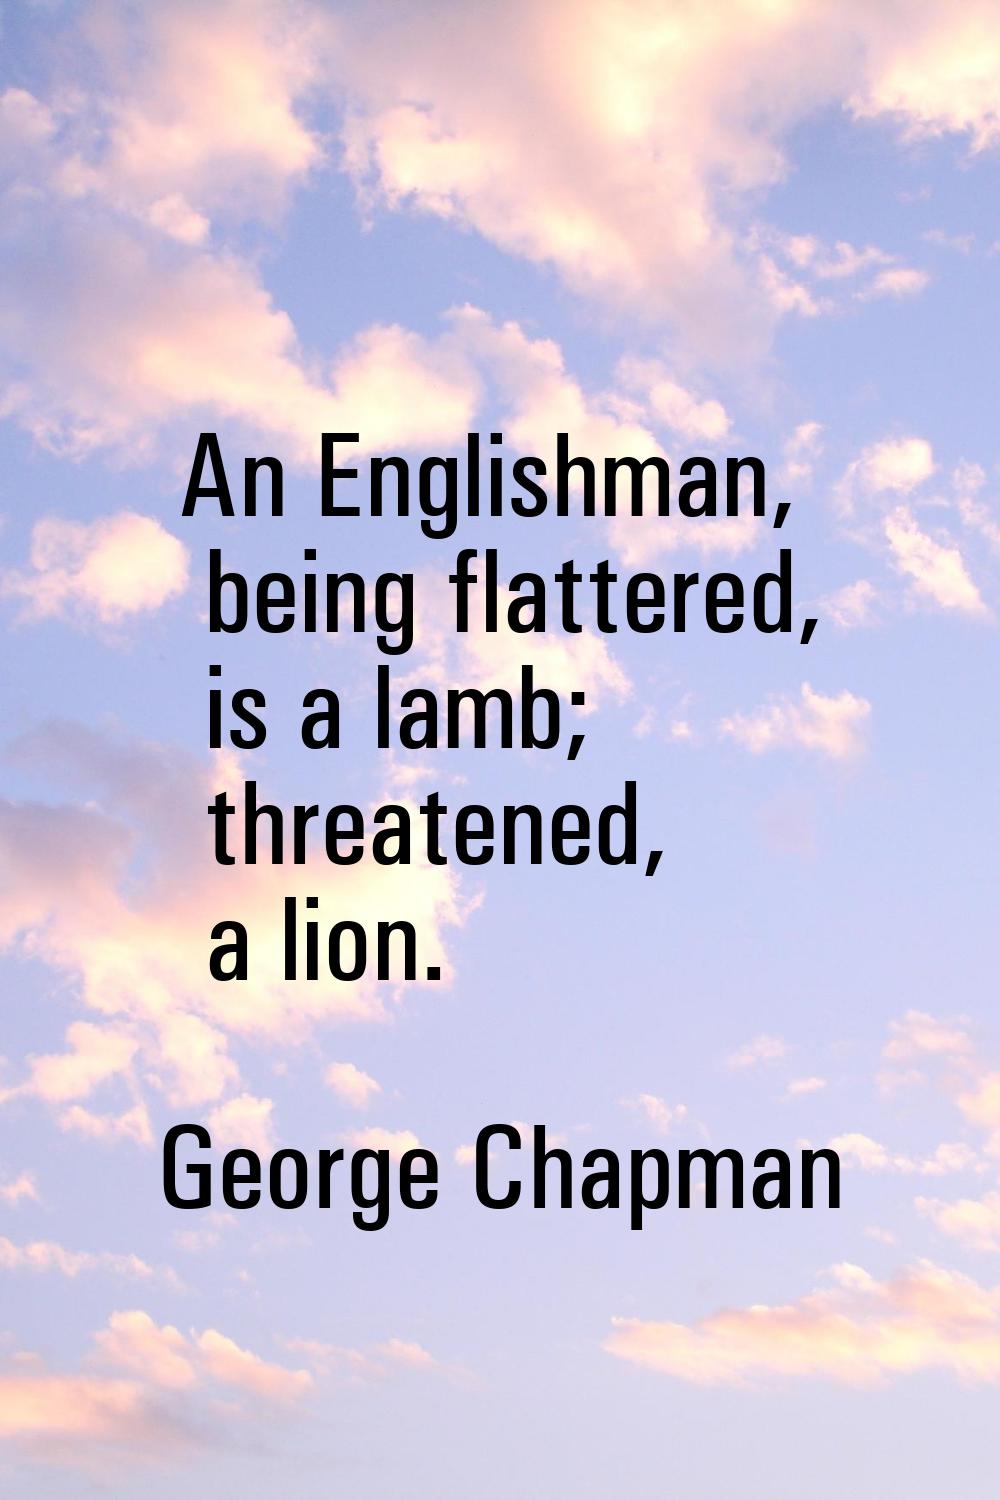 An Englishman, being flattered, is a lamb; threatened, a lion.